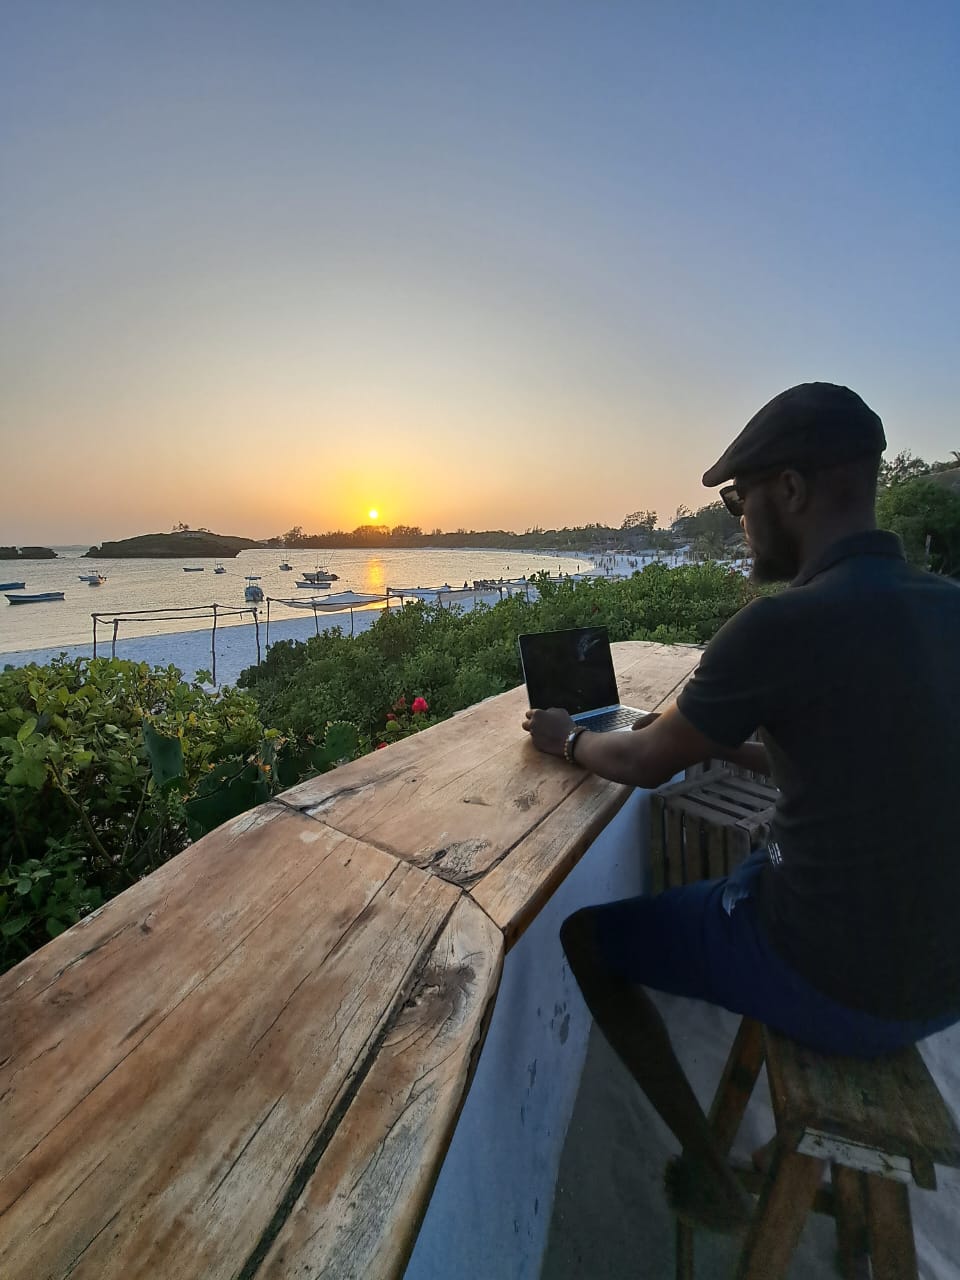 Places to visit as a Digital Nomad in Africa